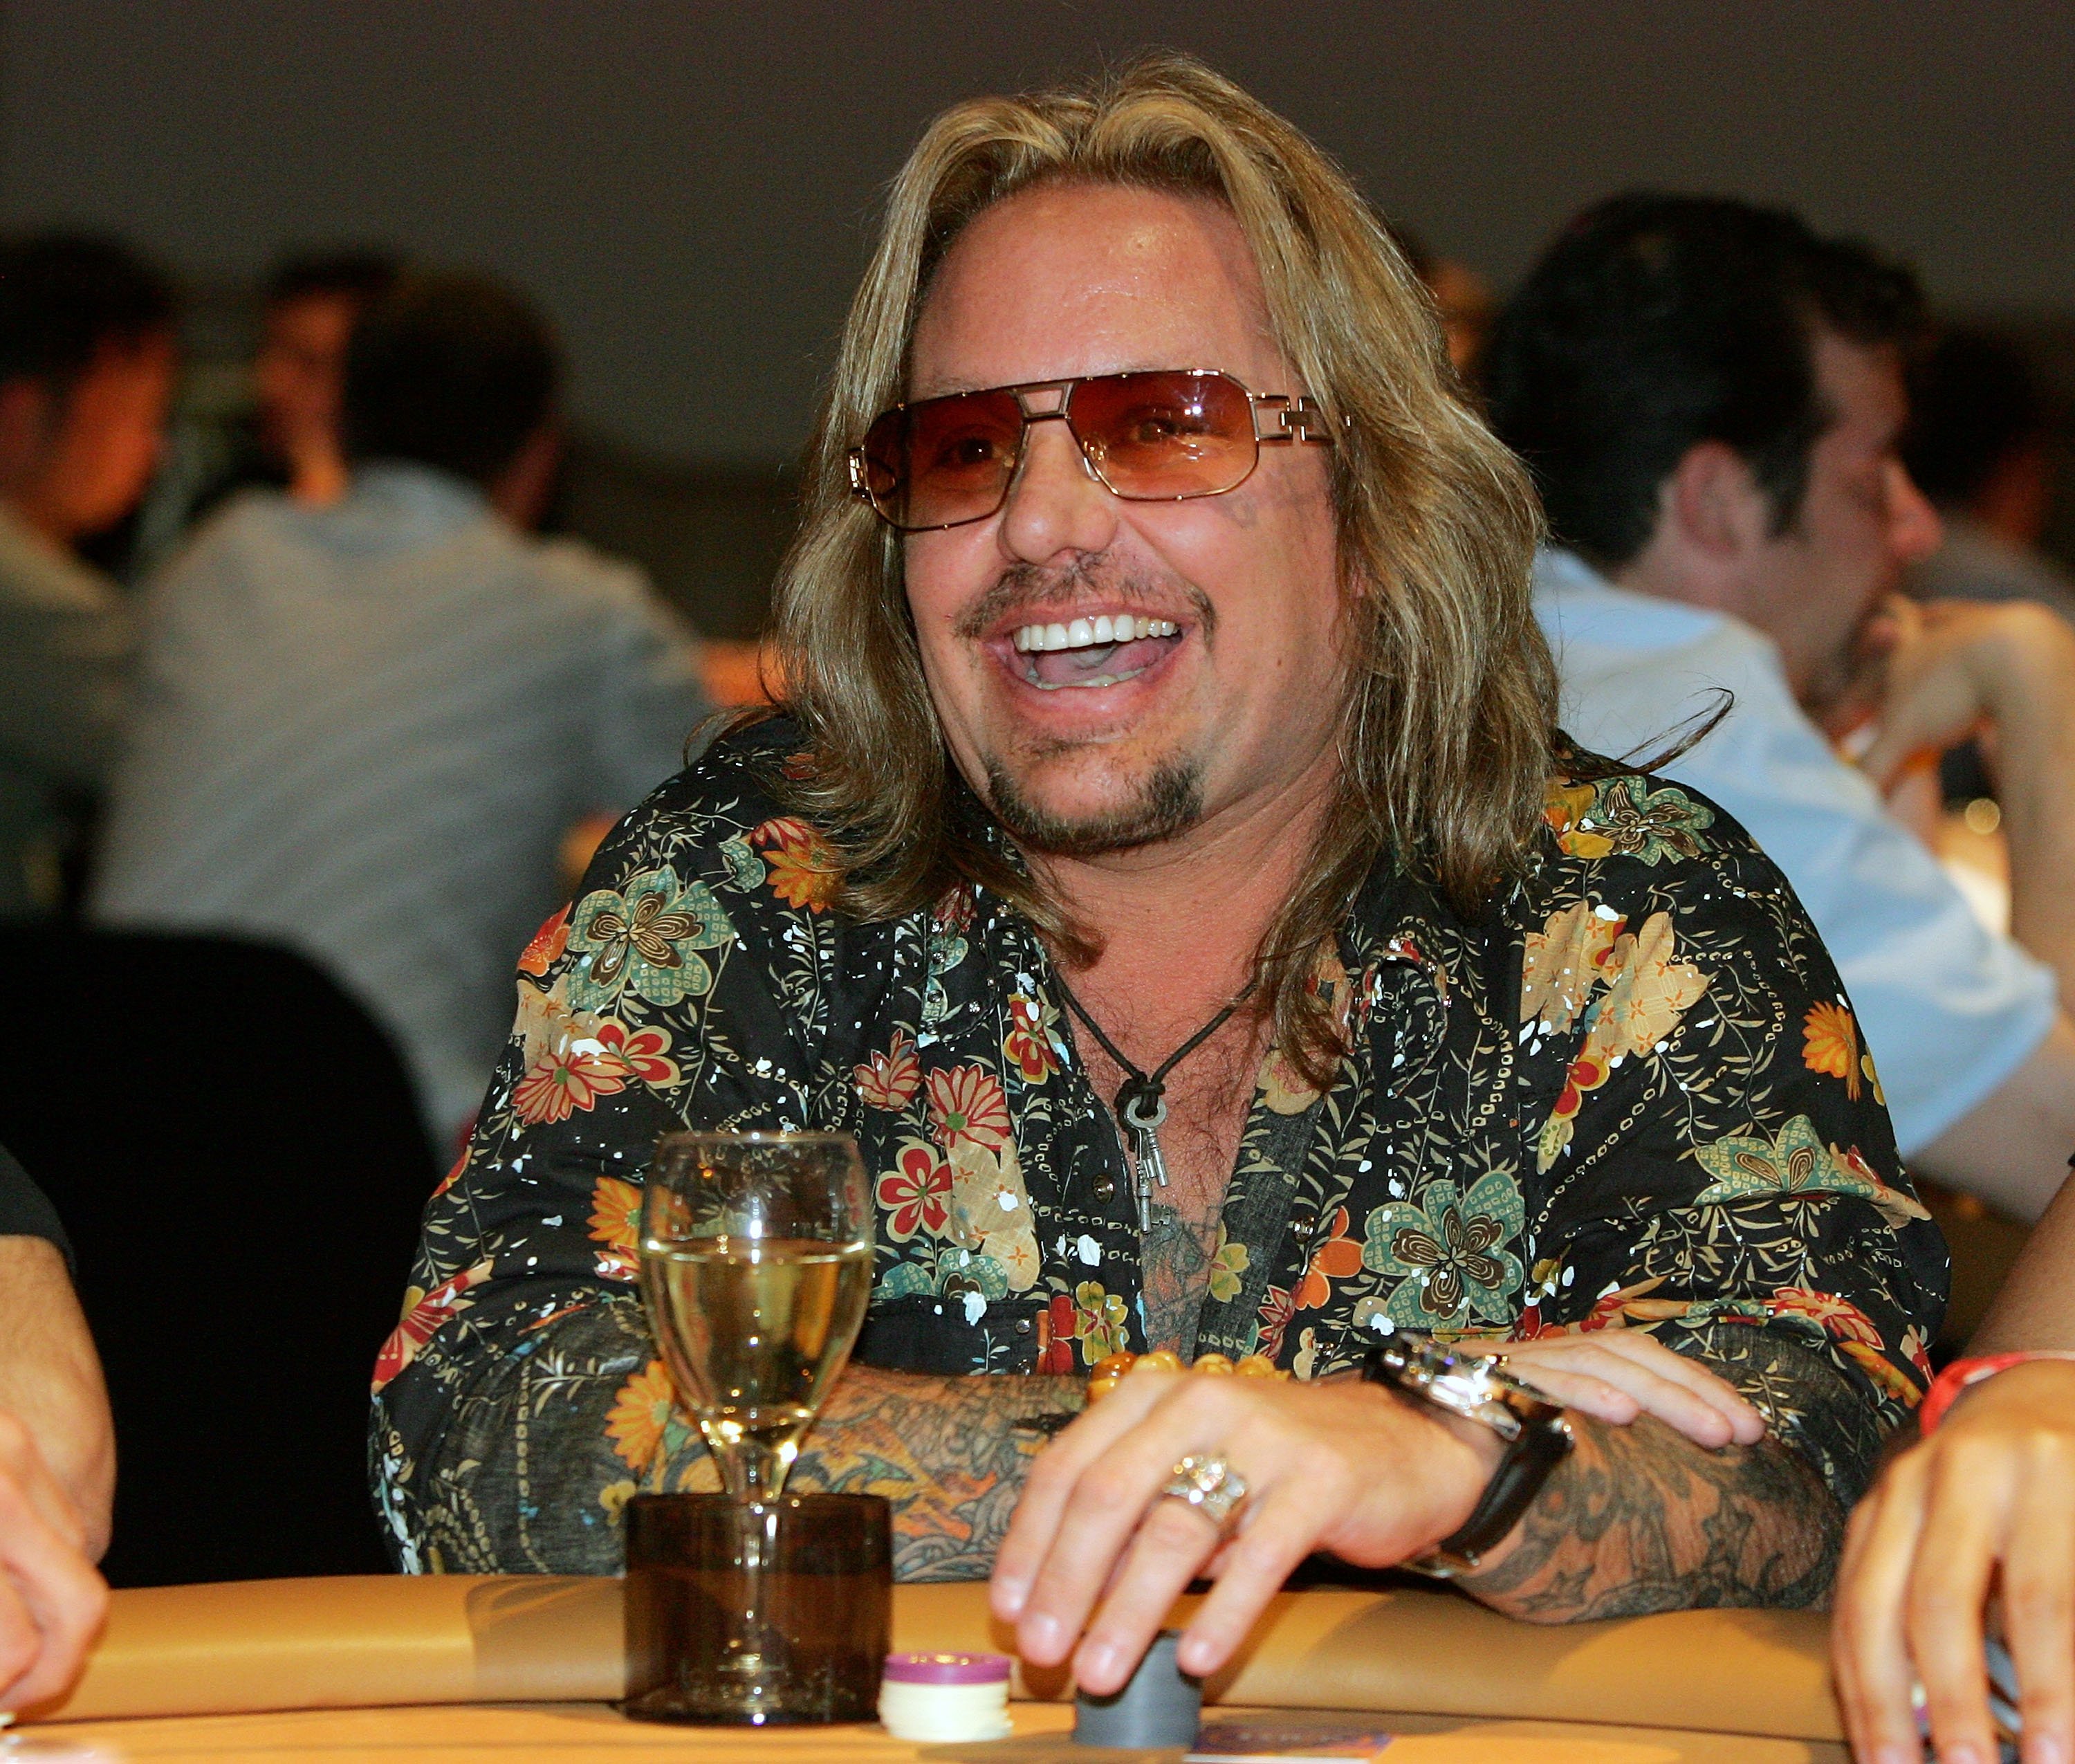 Vince Neil at a table